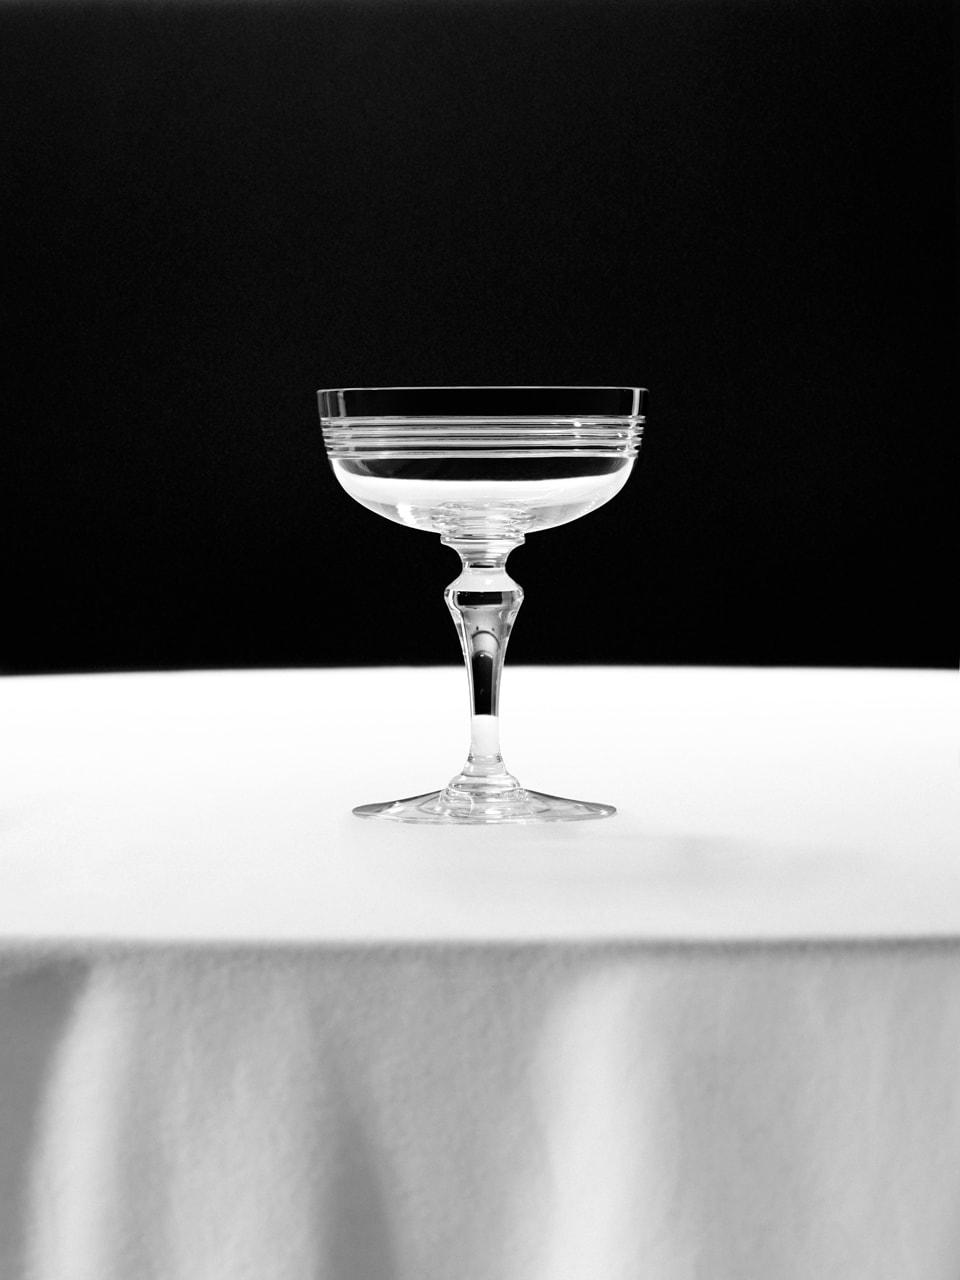 Thom Browne and Baccarat Join Forces for Archive-Inspired Crystal Glass Collection